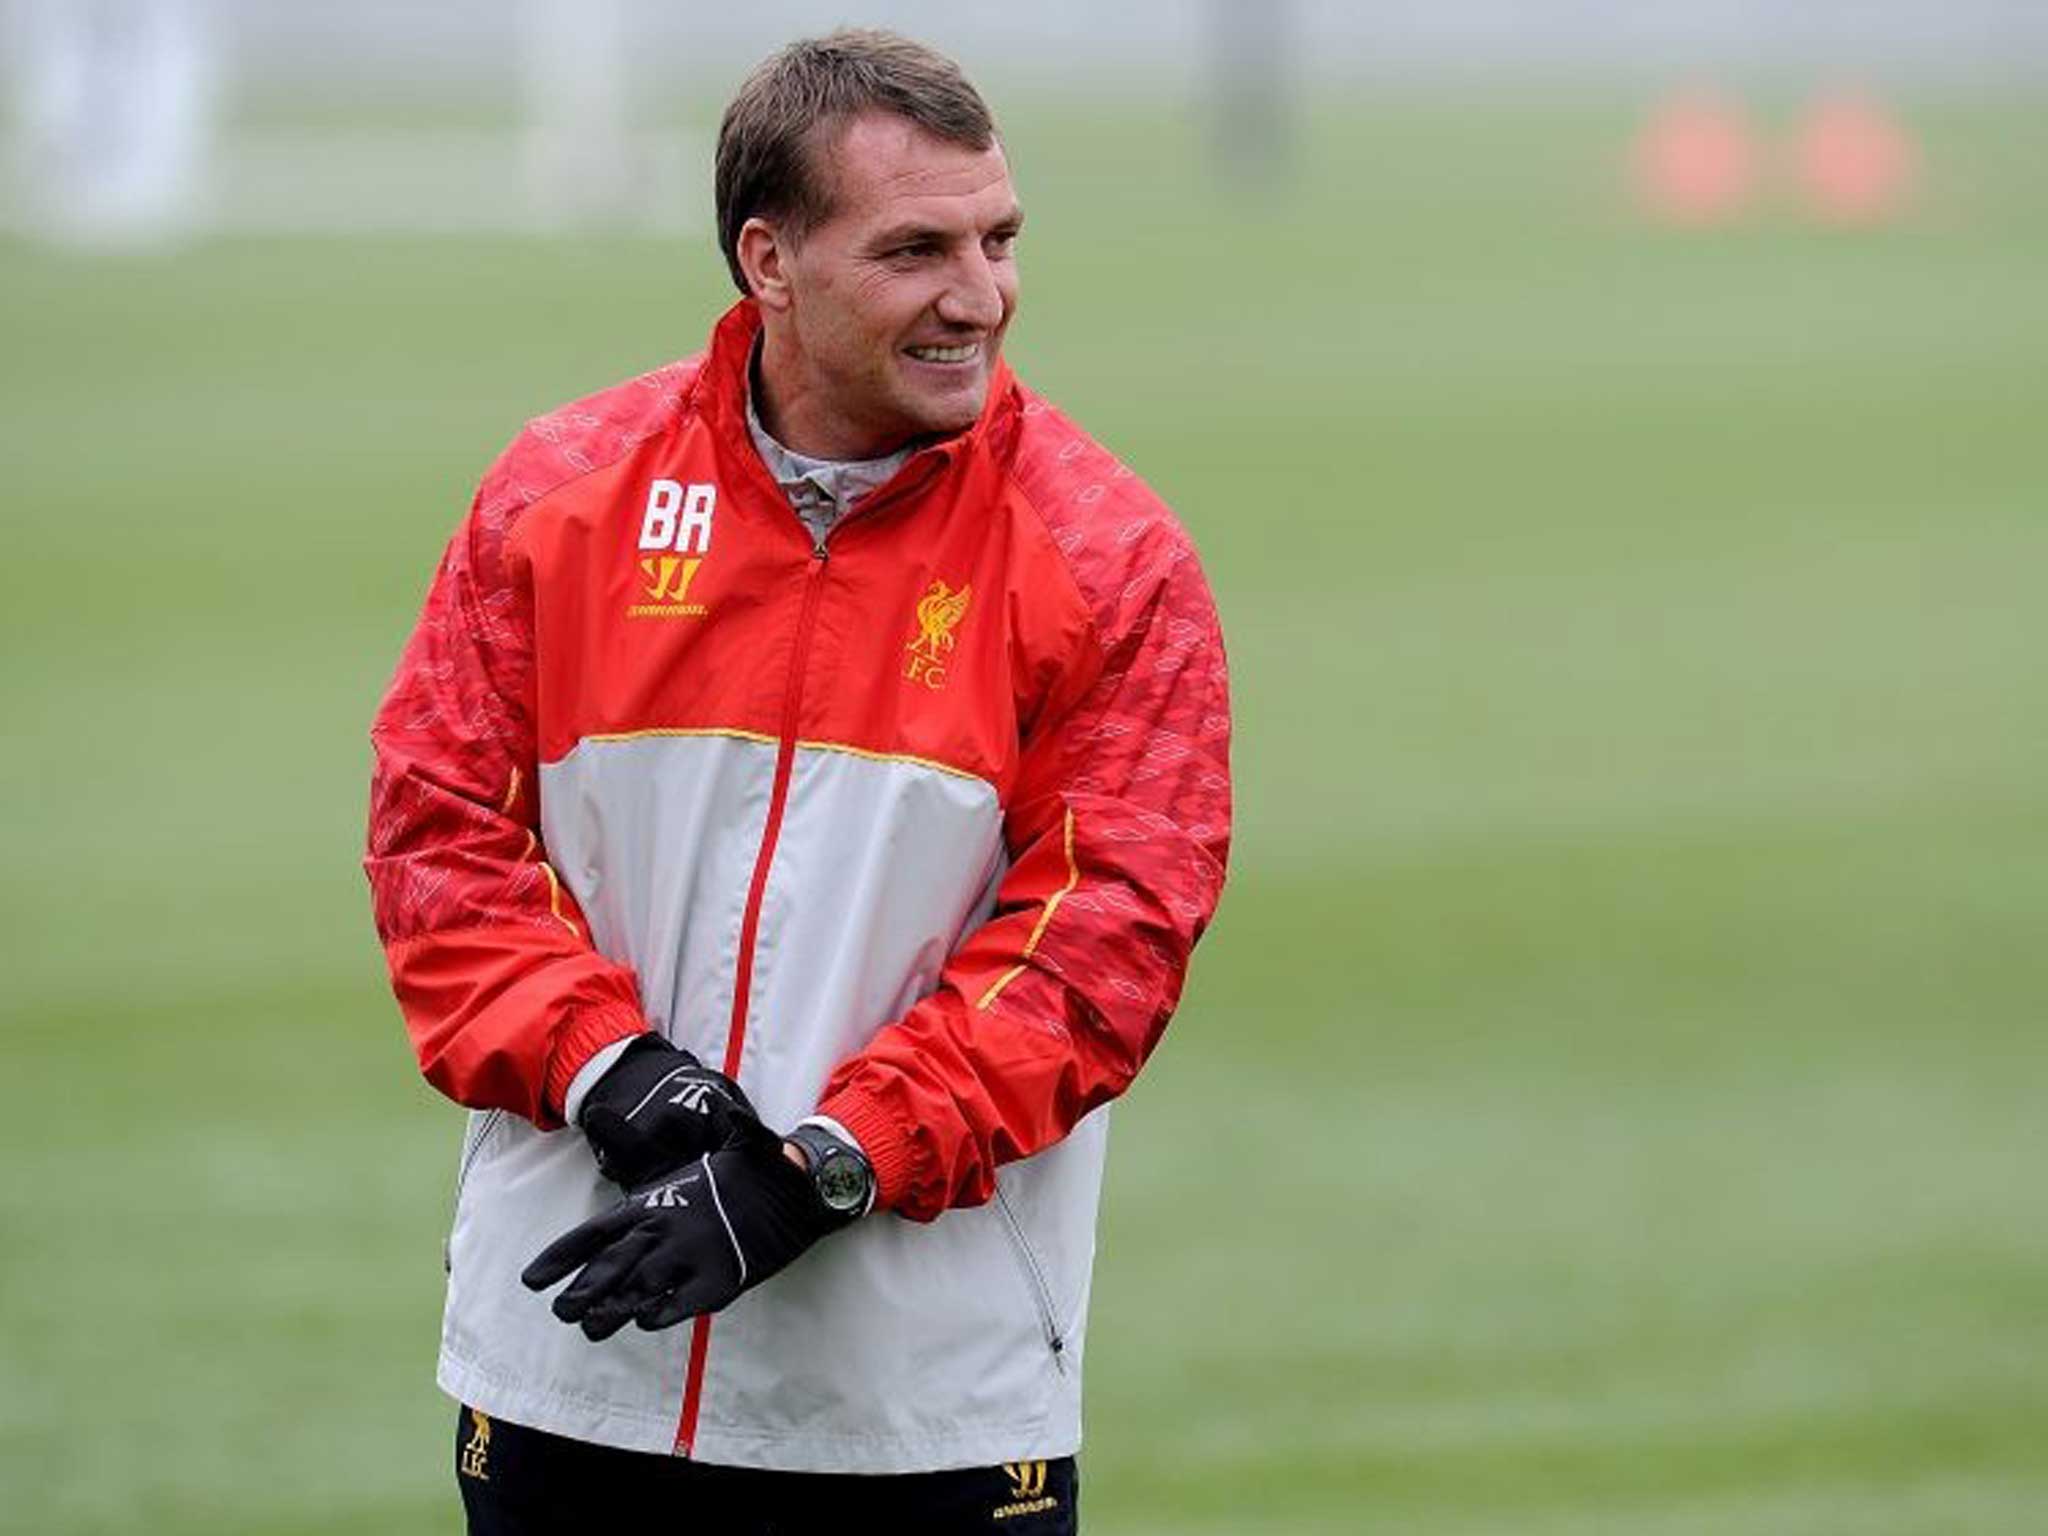 Brendan Rodgers during a training session at Melwood Training Ground